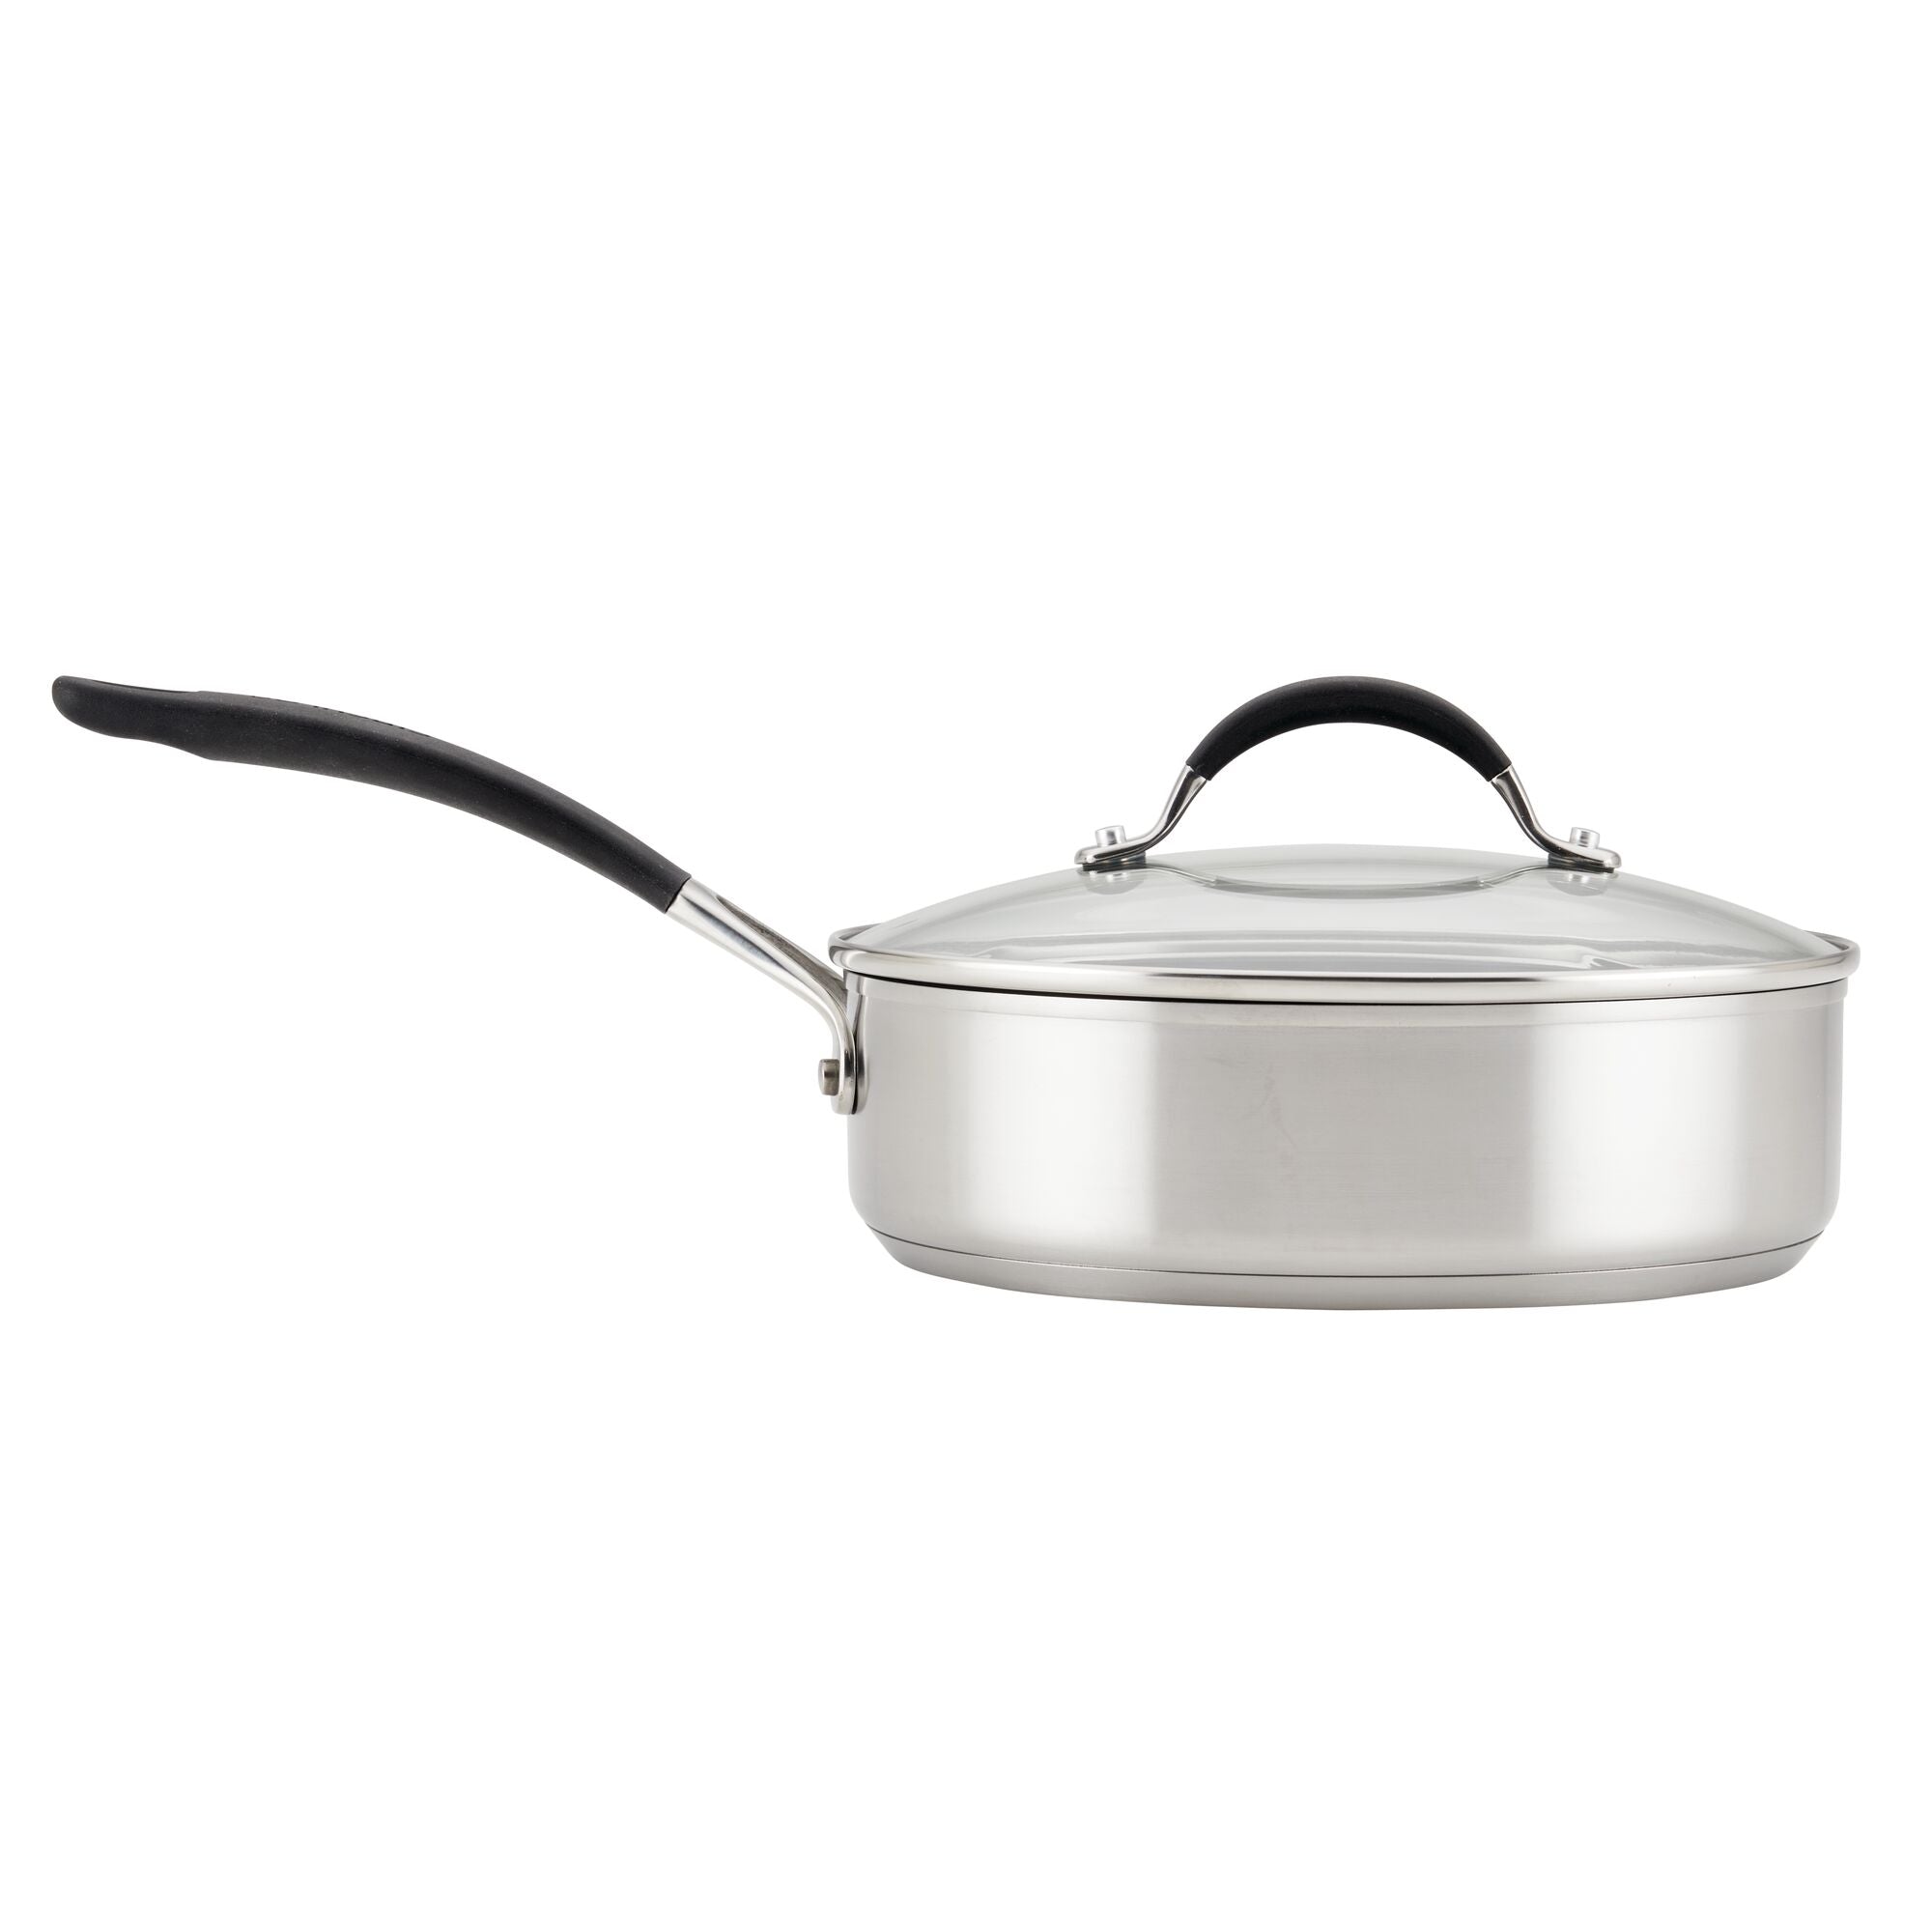 Circulon Steelshield S-Series Hybrid Stainless Cookware Review